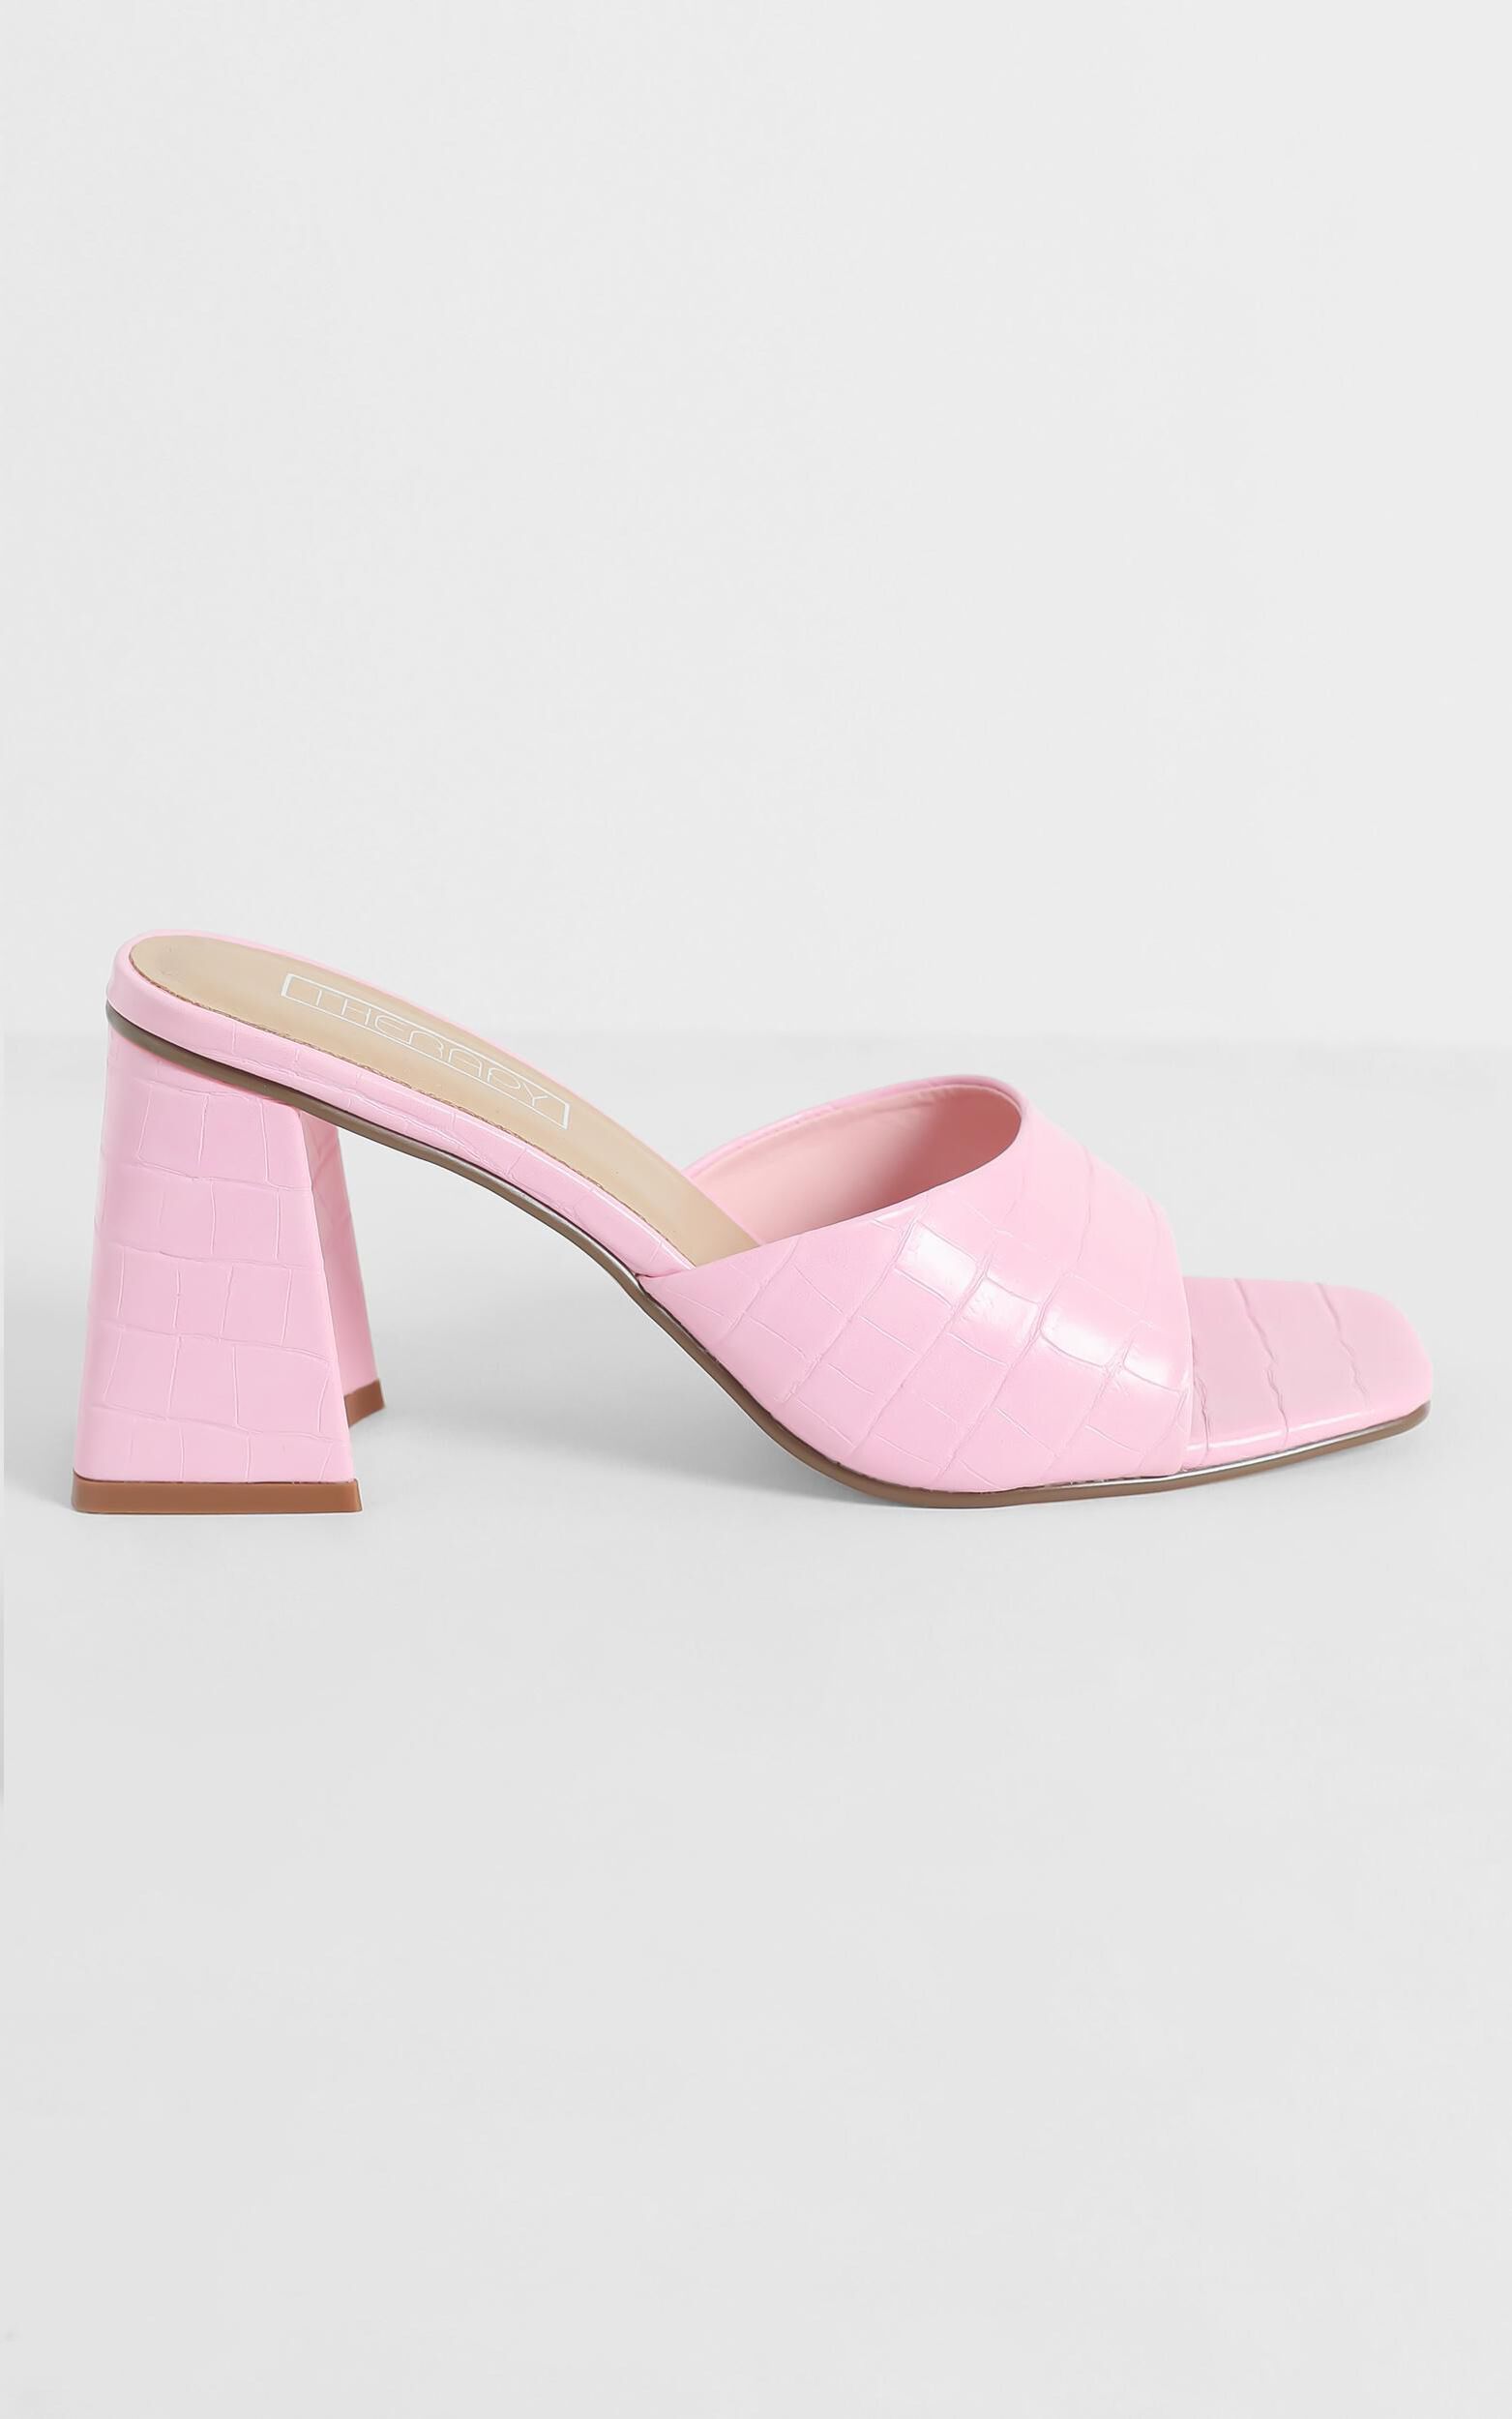 Therapy - Colina Heels in Pink - 05, PNK2